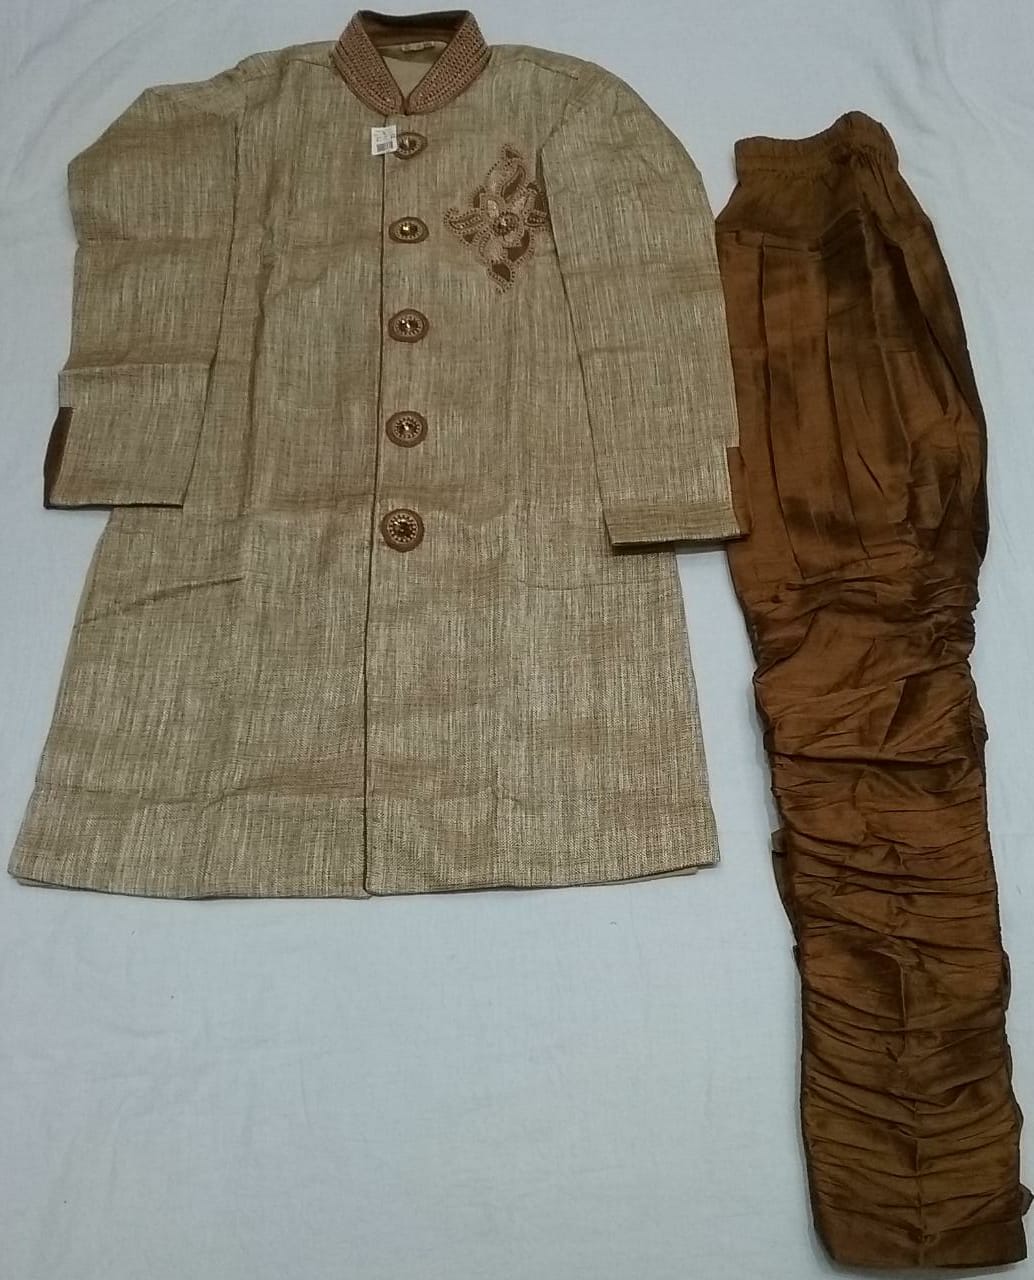 121540 A $175.00 MENS SHERWANI WITH BRITCHES PANT SIZE 36,38,40,42,44